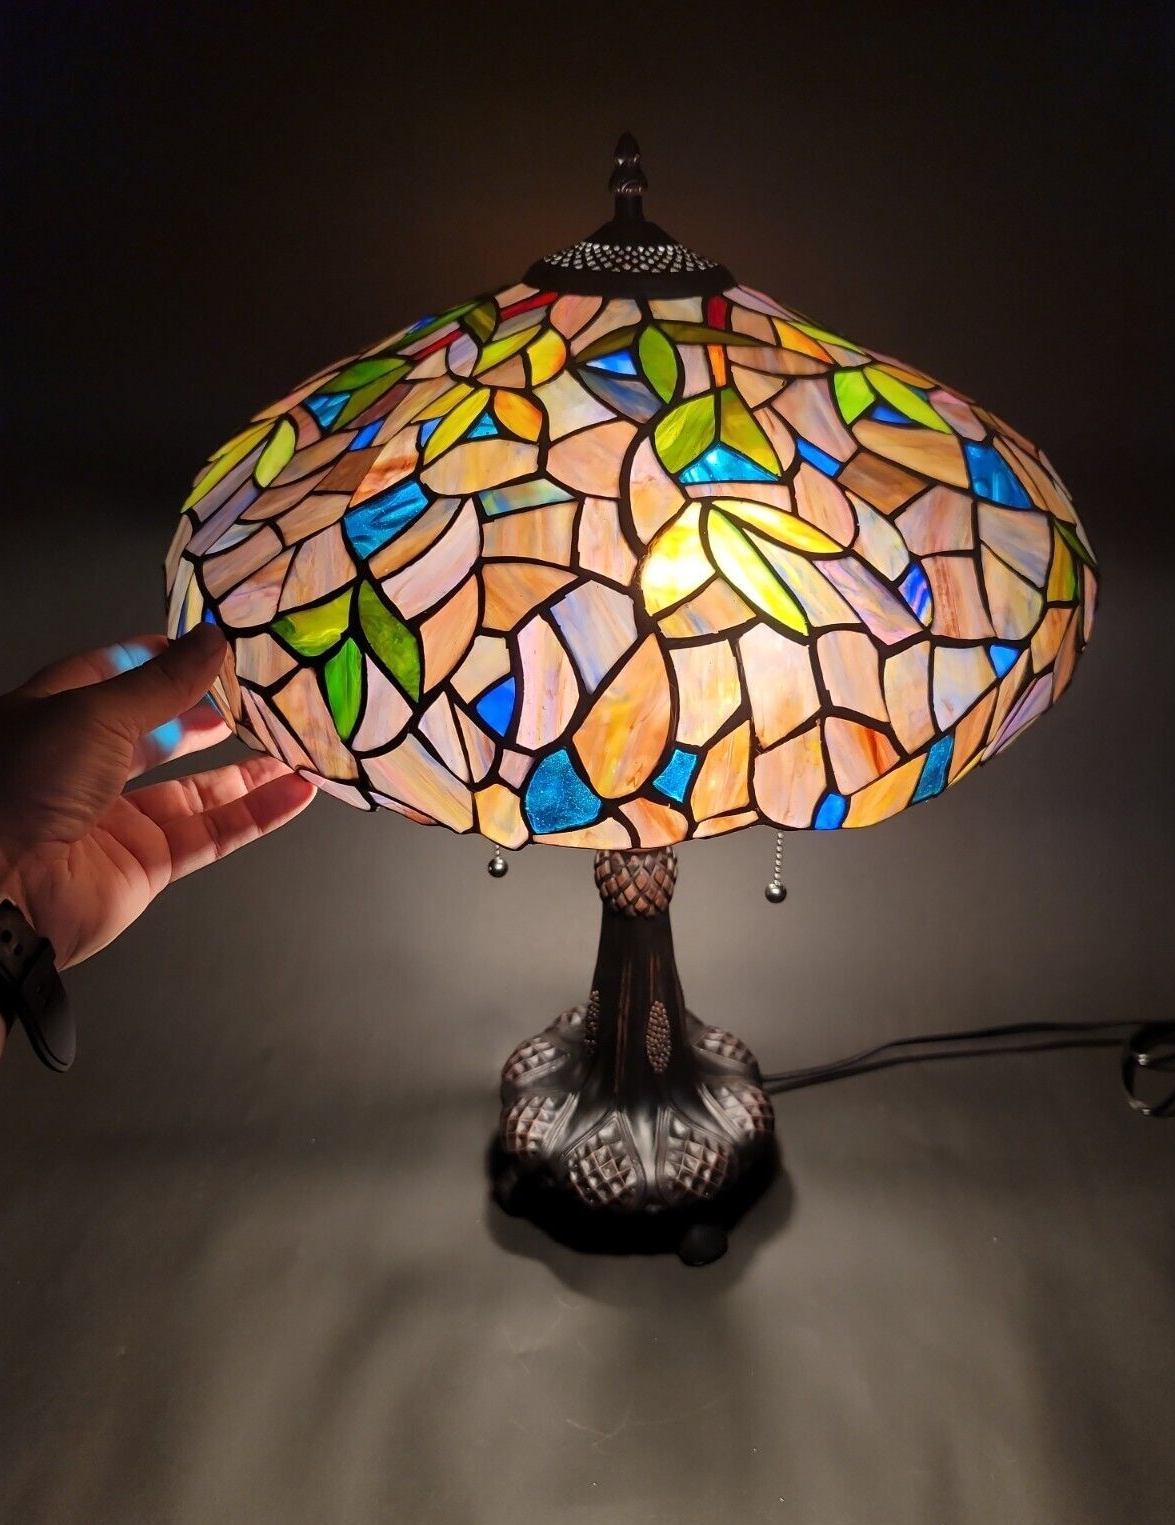 22" Antique Vintage Style Stained Glass Wisteria Floral Table Lamp